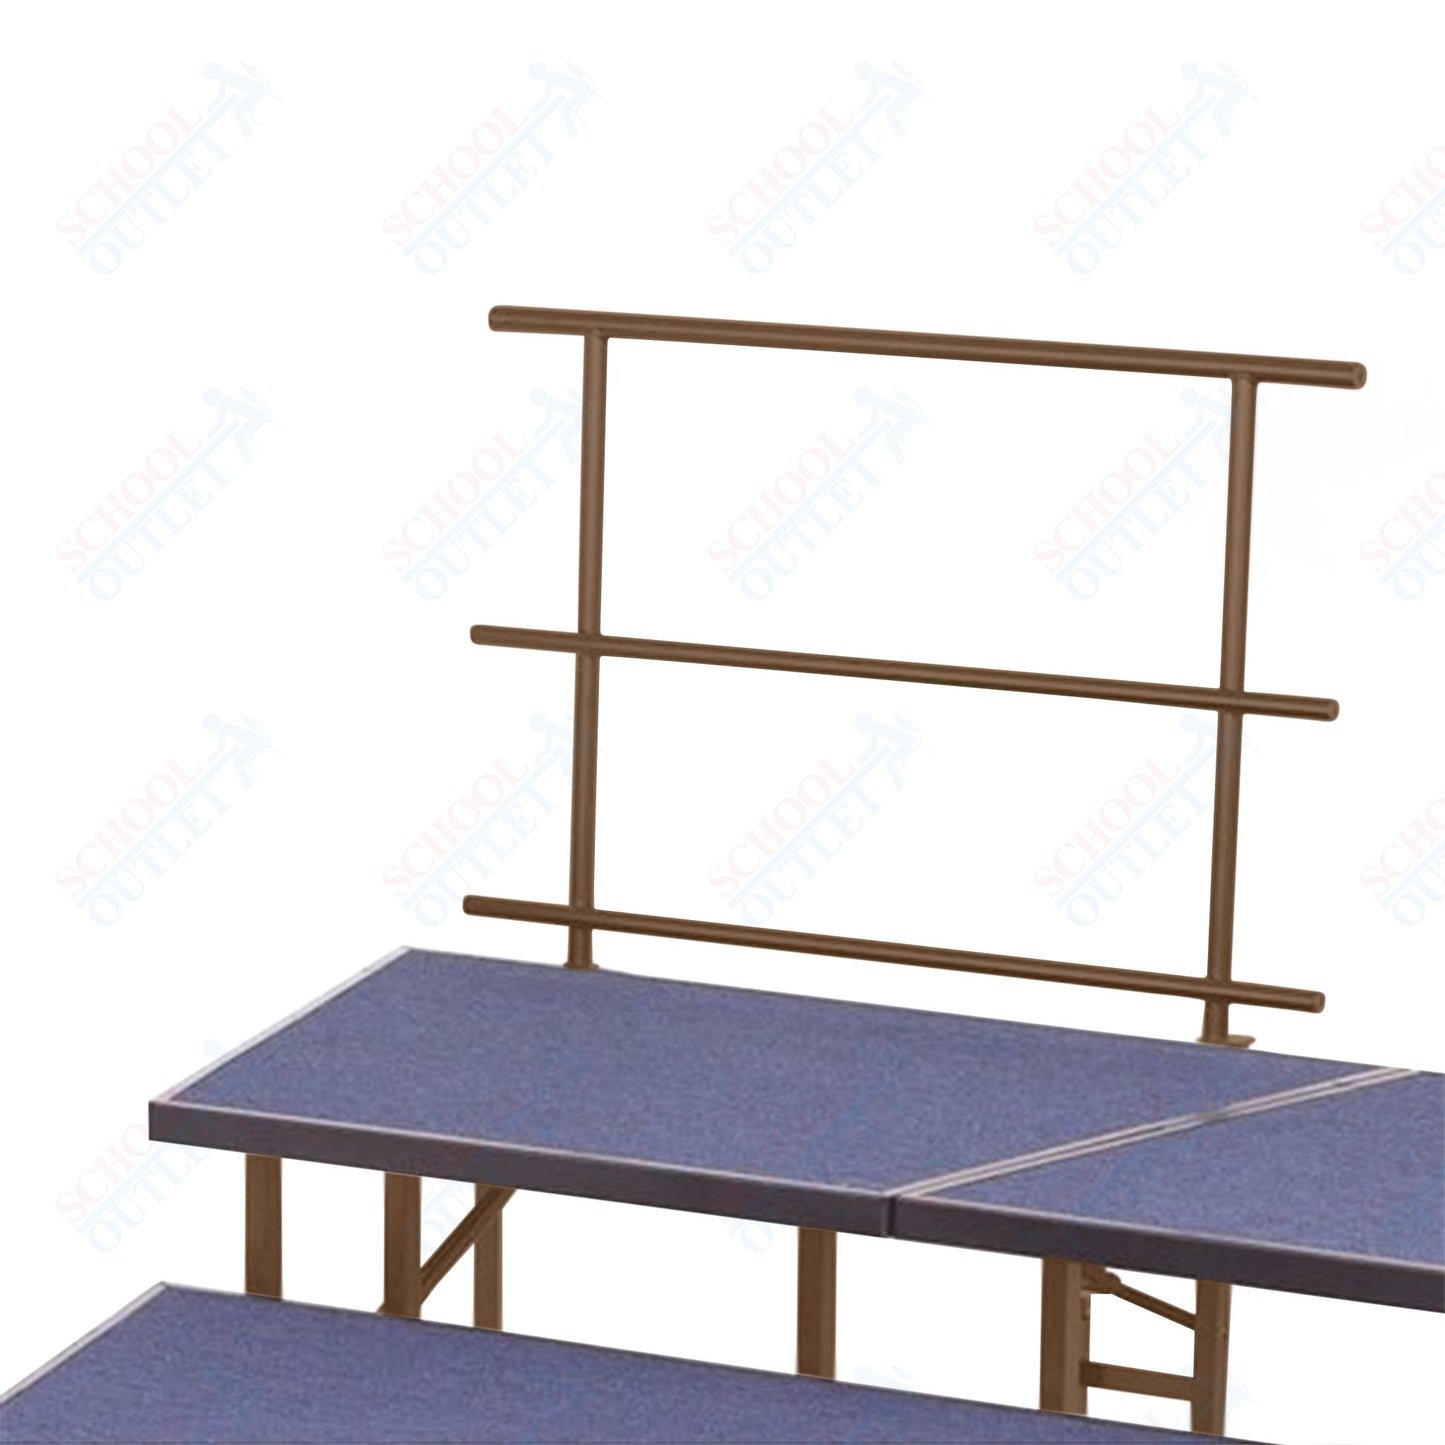 AmTab Stage and Riser Guard Rail - Chair Stop - 34" W x 31"H  (AmTab AMT-STGR36)